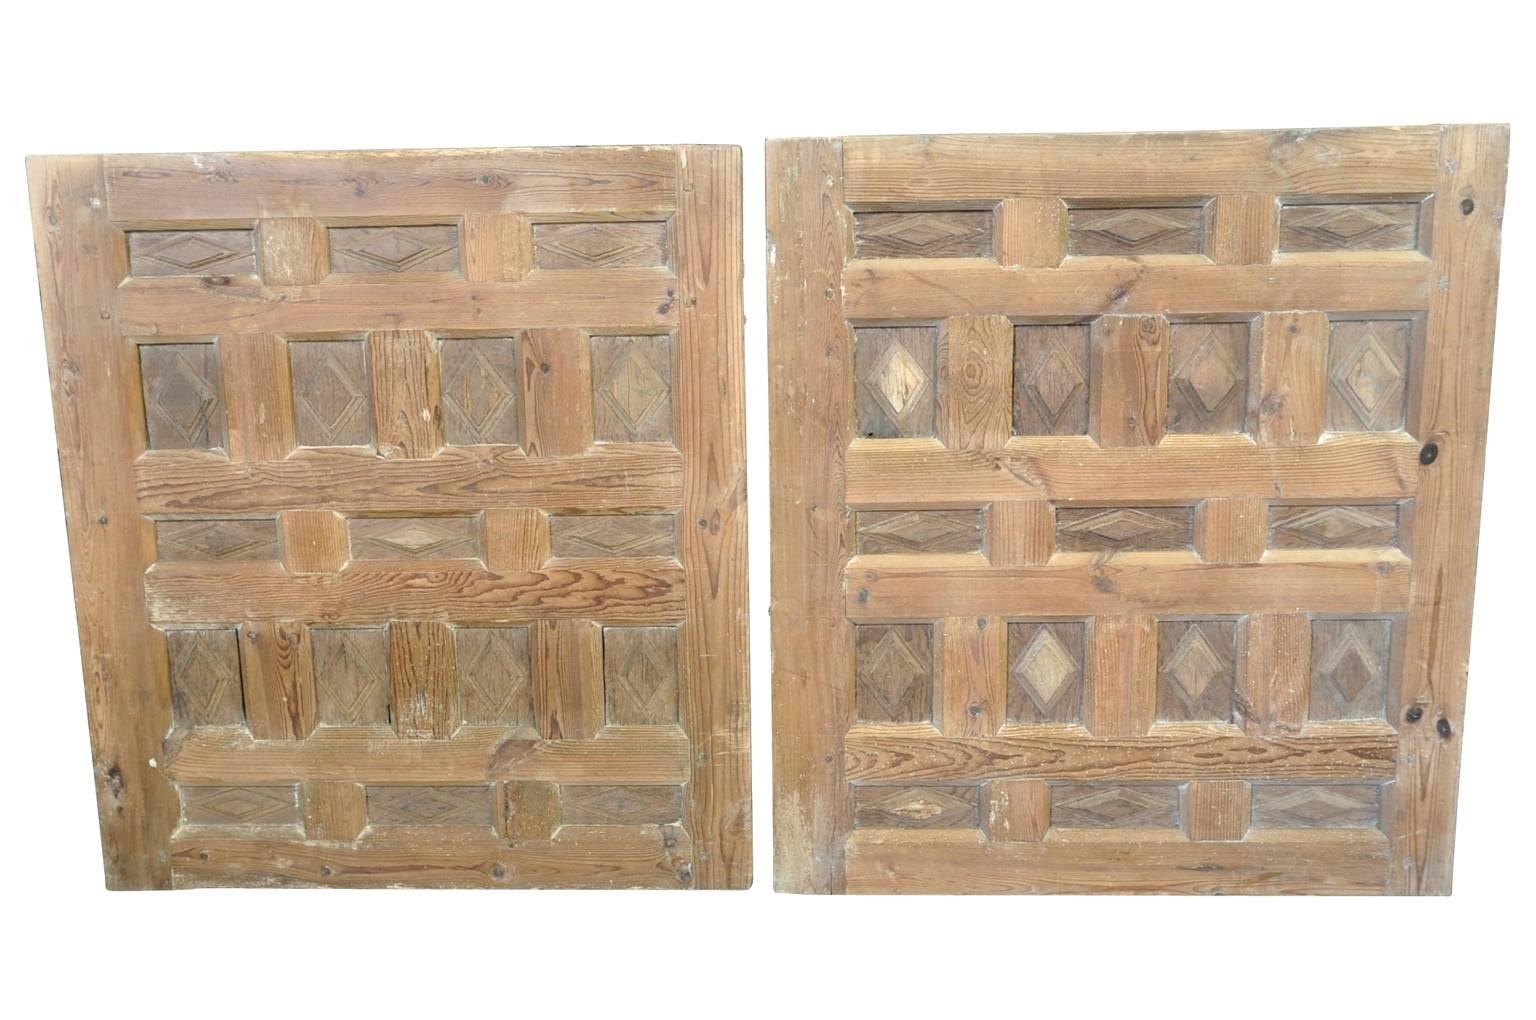 A beautiful pair of Spanish boiserie panels in carved meleze wood - a very hard pine. These panels were wall inserts and seen from both sides. Wonderful architectural accents and perfect as headboards to twin beds.